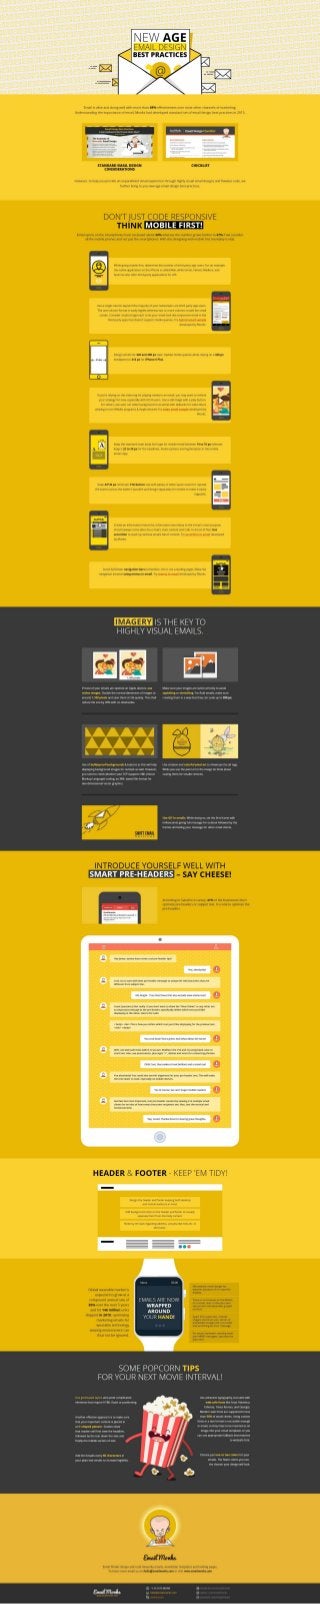 New age-email-design-infographic-pdf